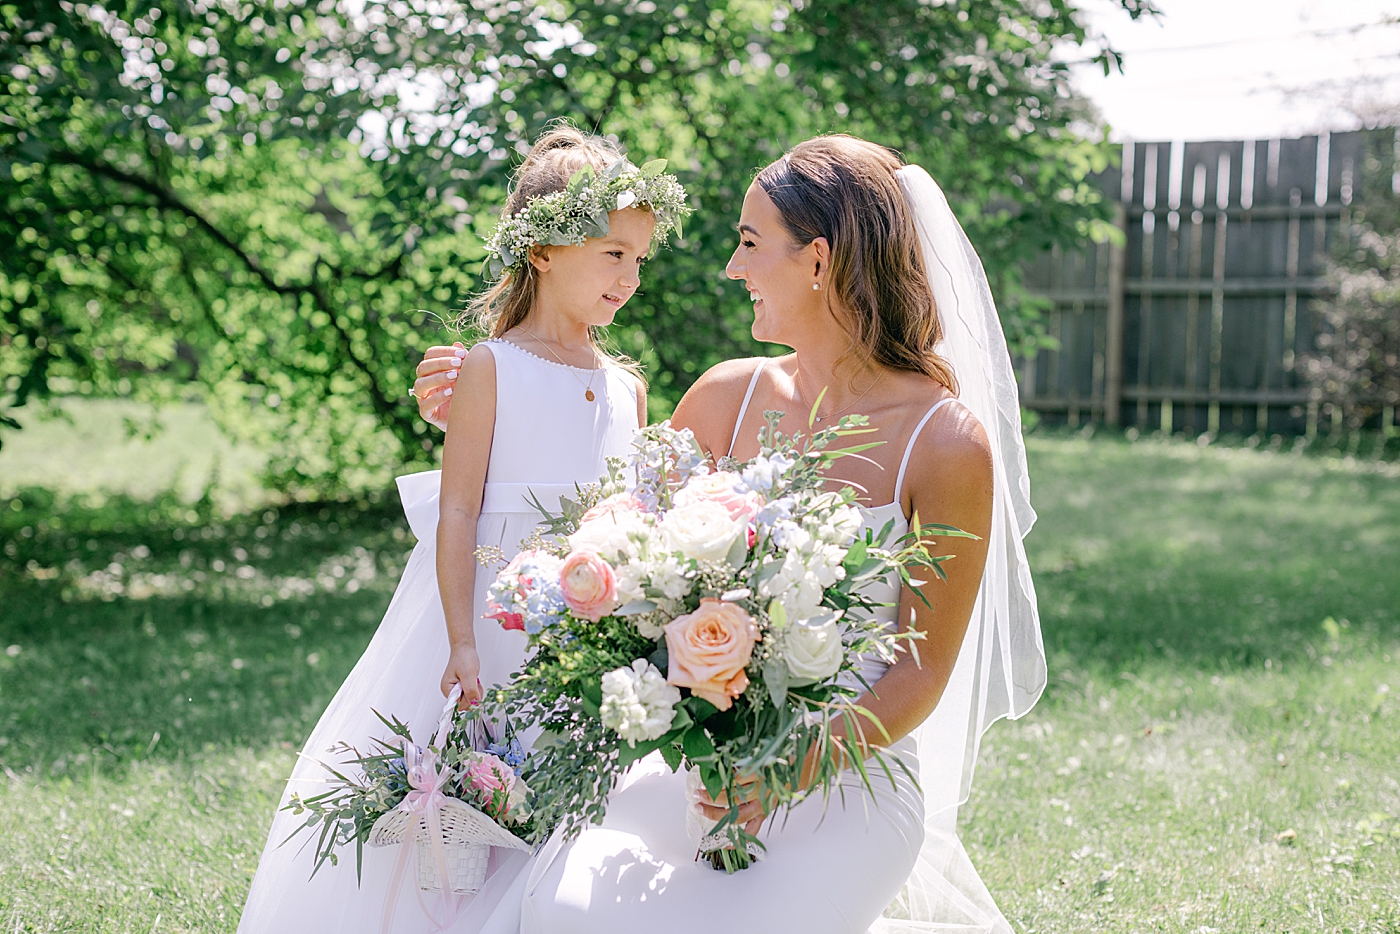 Bride with flower girl | Image by Hope Helmuth Photography